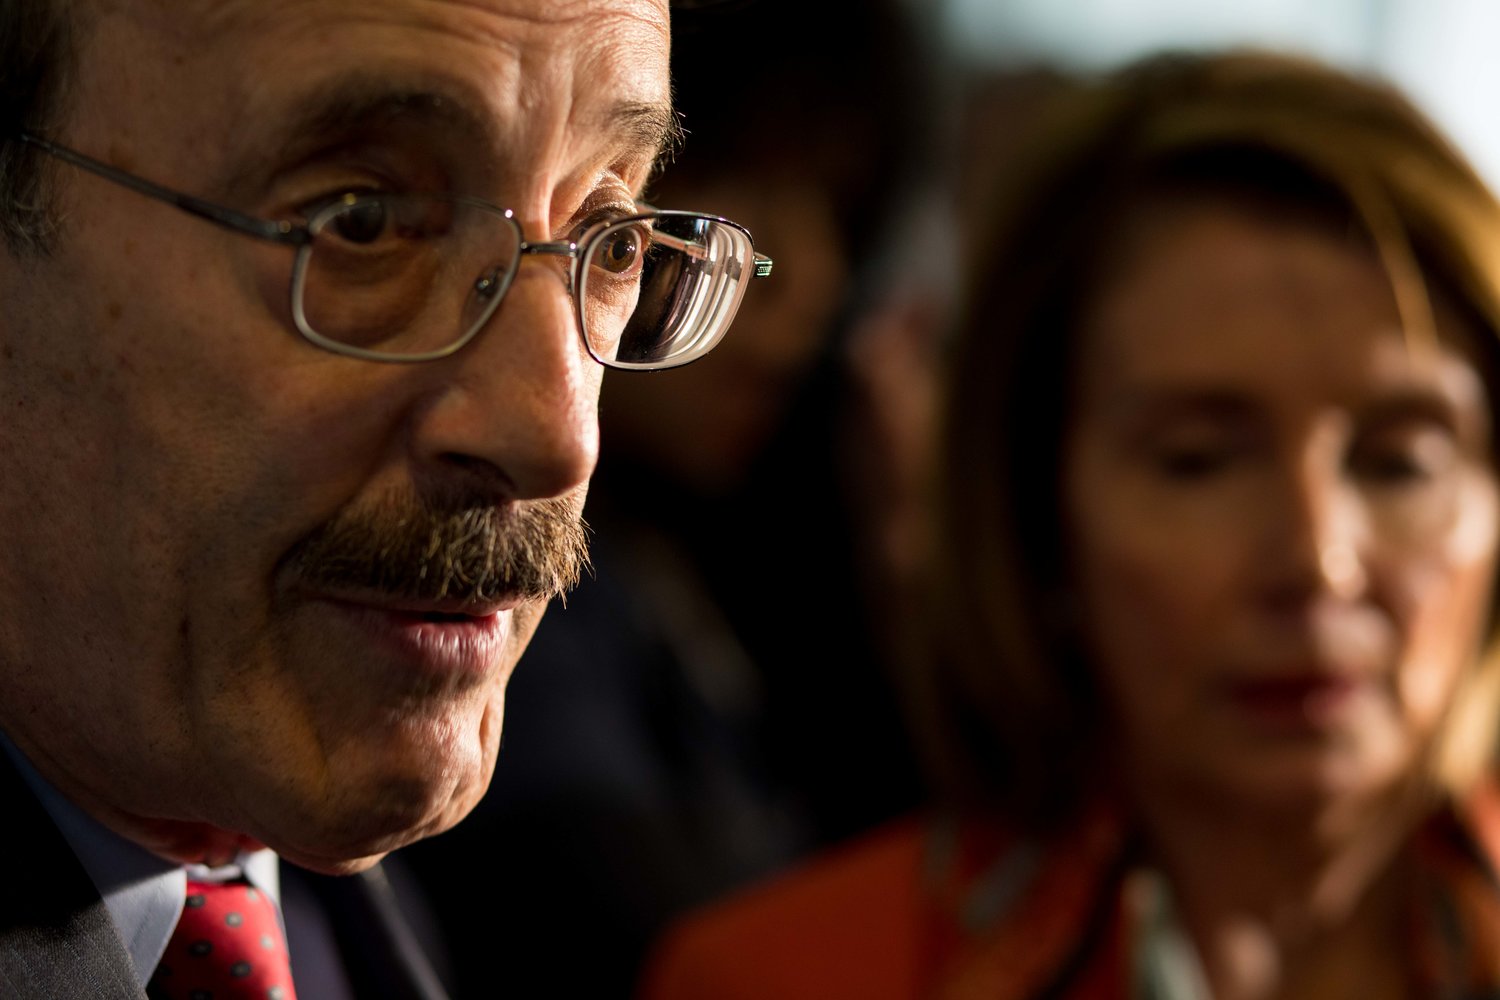 U.S. Rep. Eliot Engel was among a number of U.S. House lawmakers who questioned Dr. Rick Bright from the U.S. Department of Health and Human Services following his allegations the Trump administration ignored his warnings about the coronavirus that causes COVID-19.